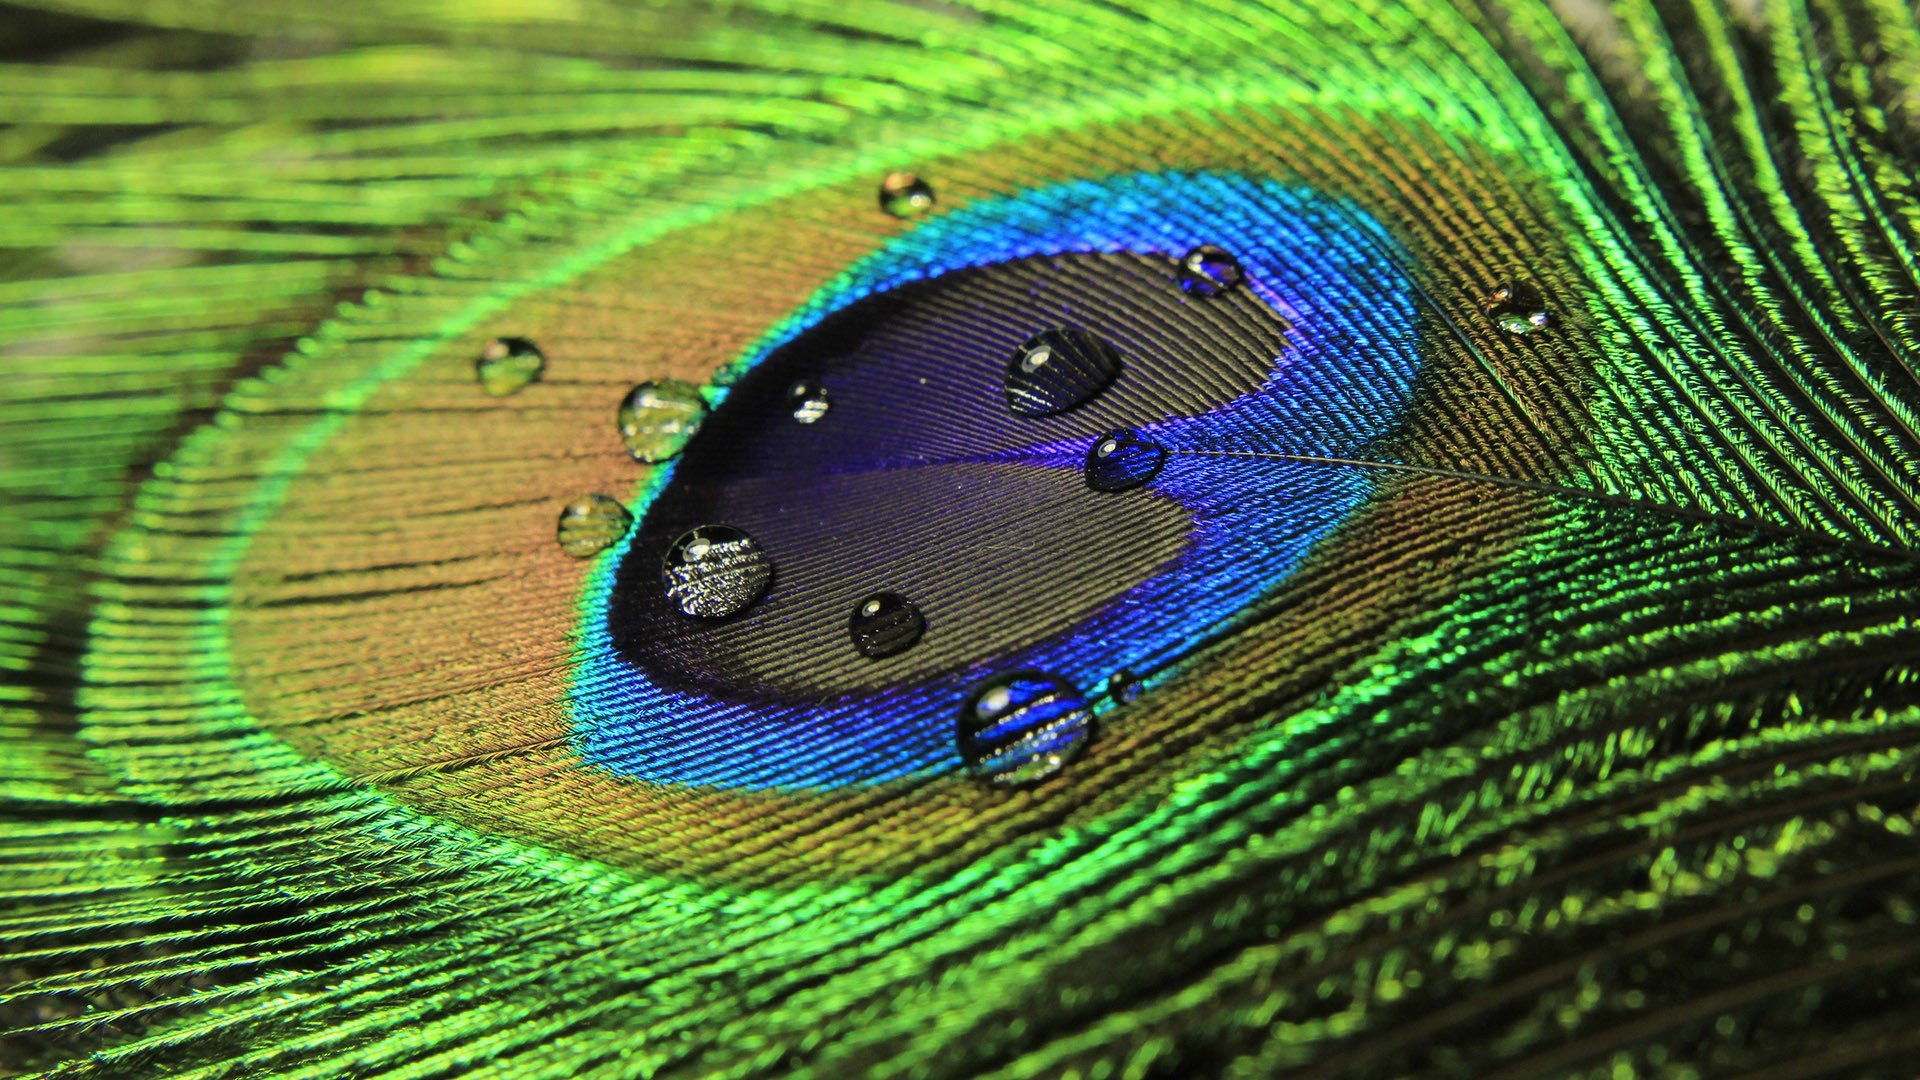 Download Hd 1080p Water Drop Computer Wallpaper Id430330 For Free